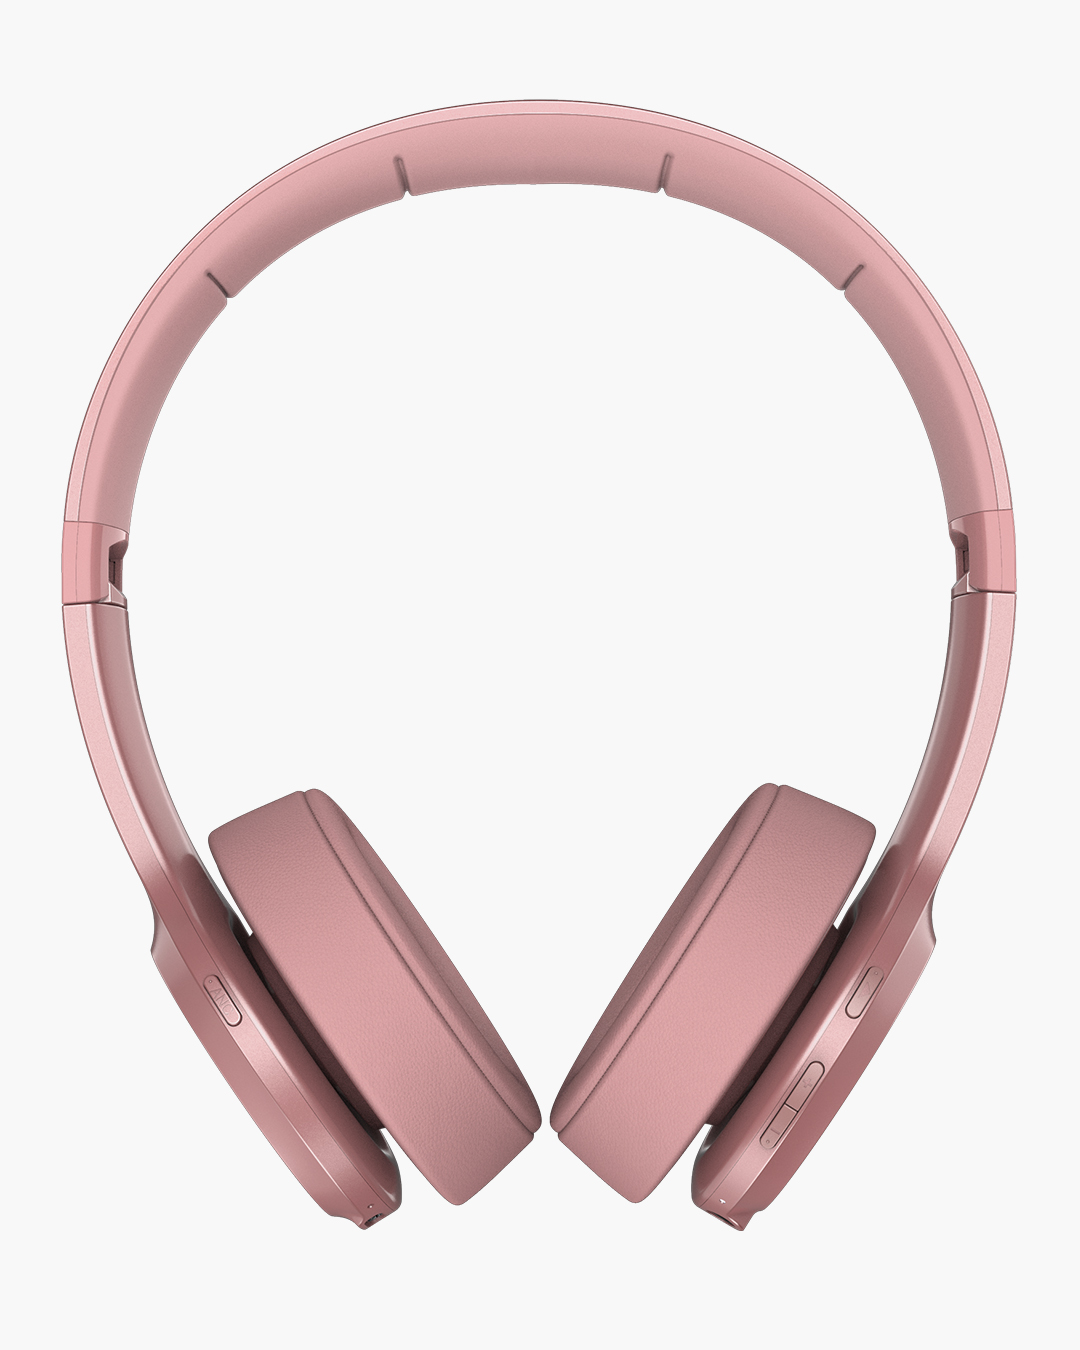 Fresh 'n Rebel - Code ANC - Wireless on-ear headphones with active noise cancelling - Dusty Pink